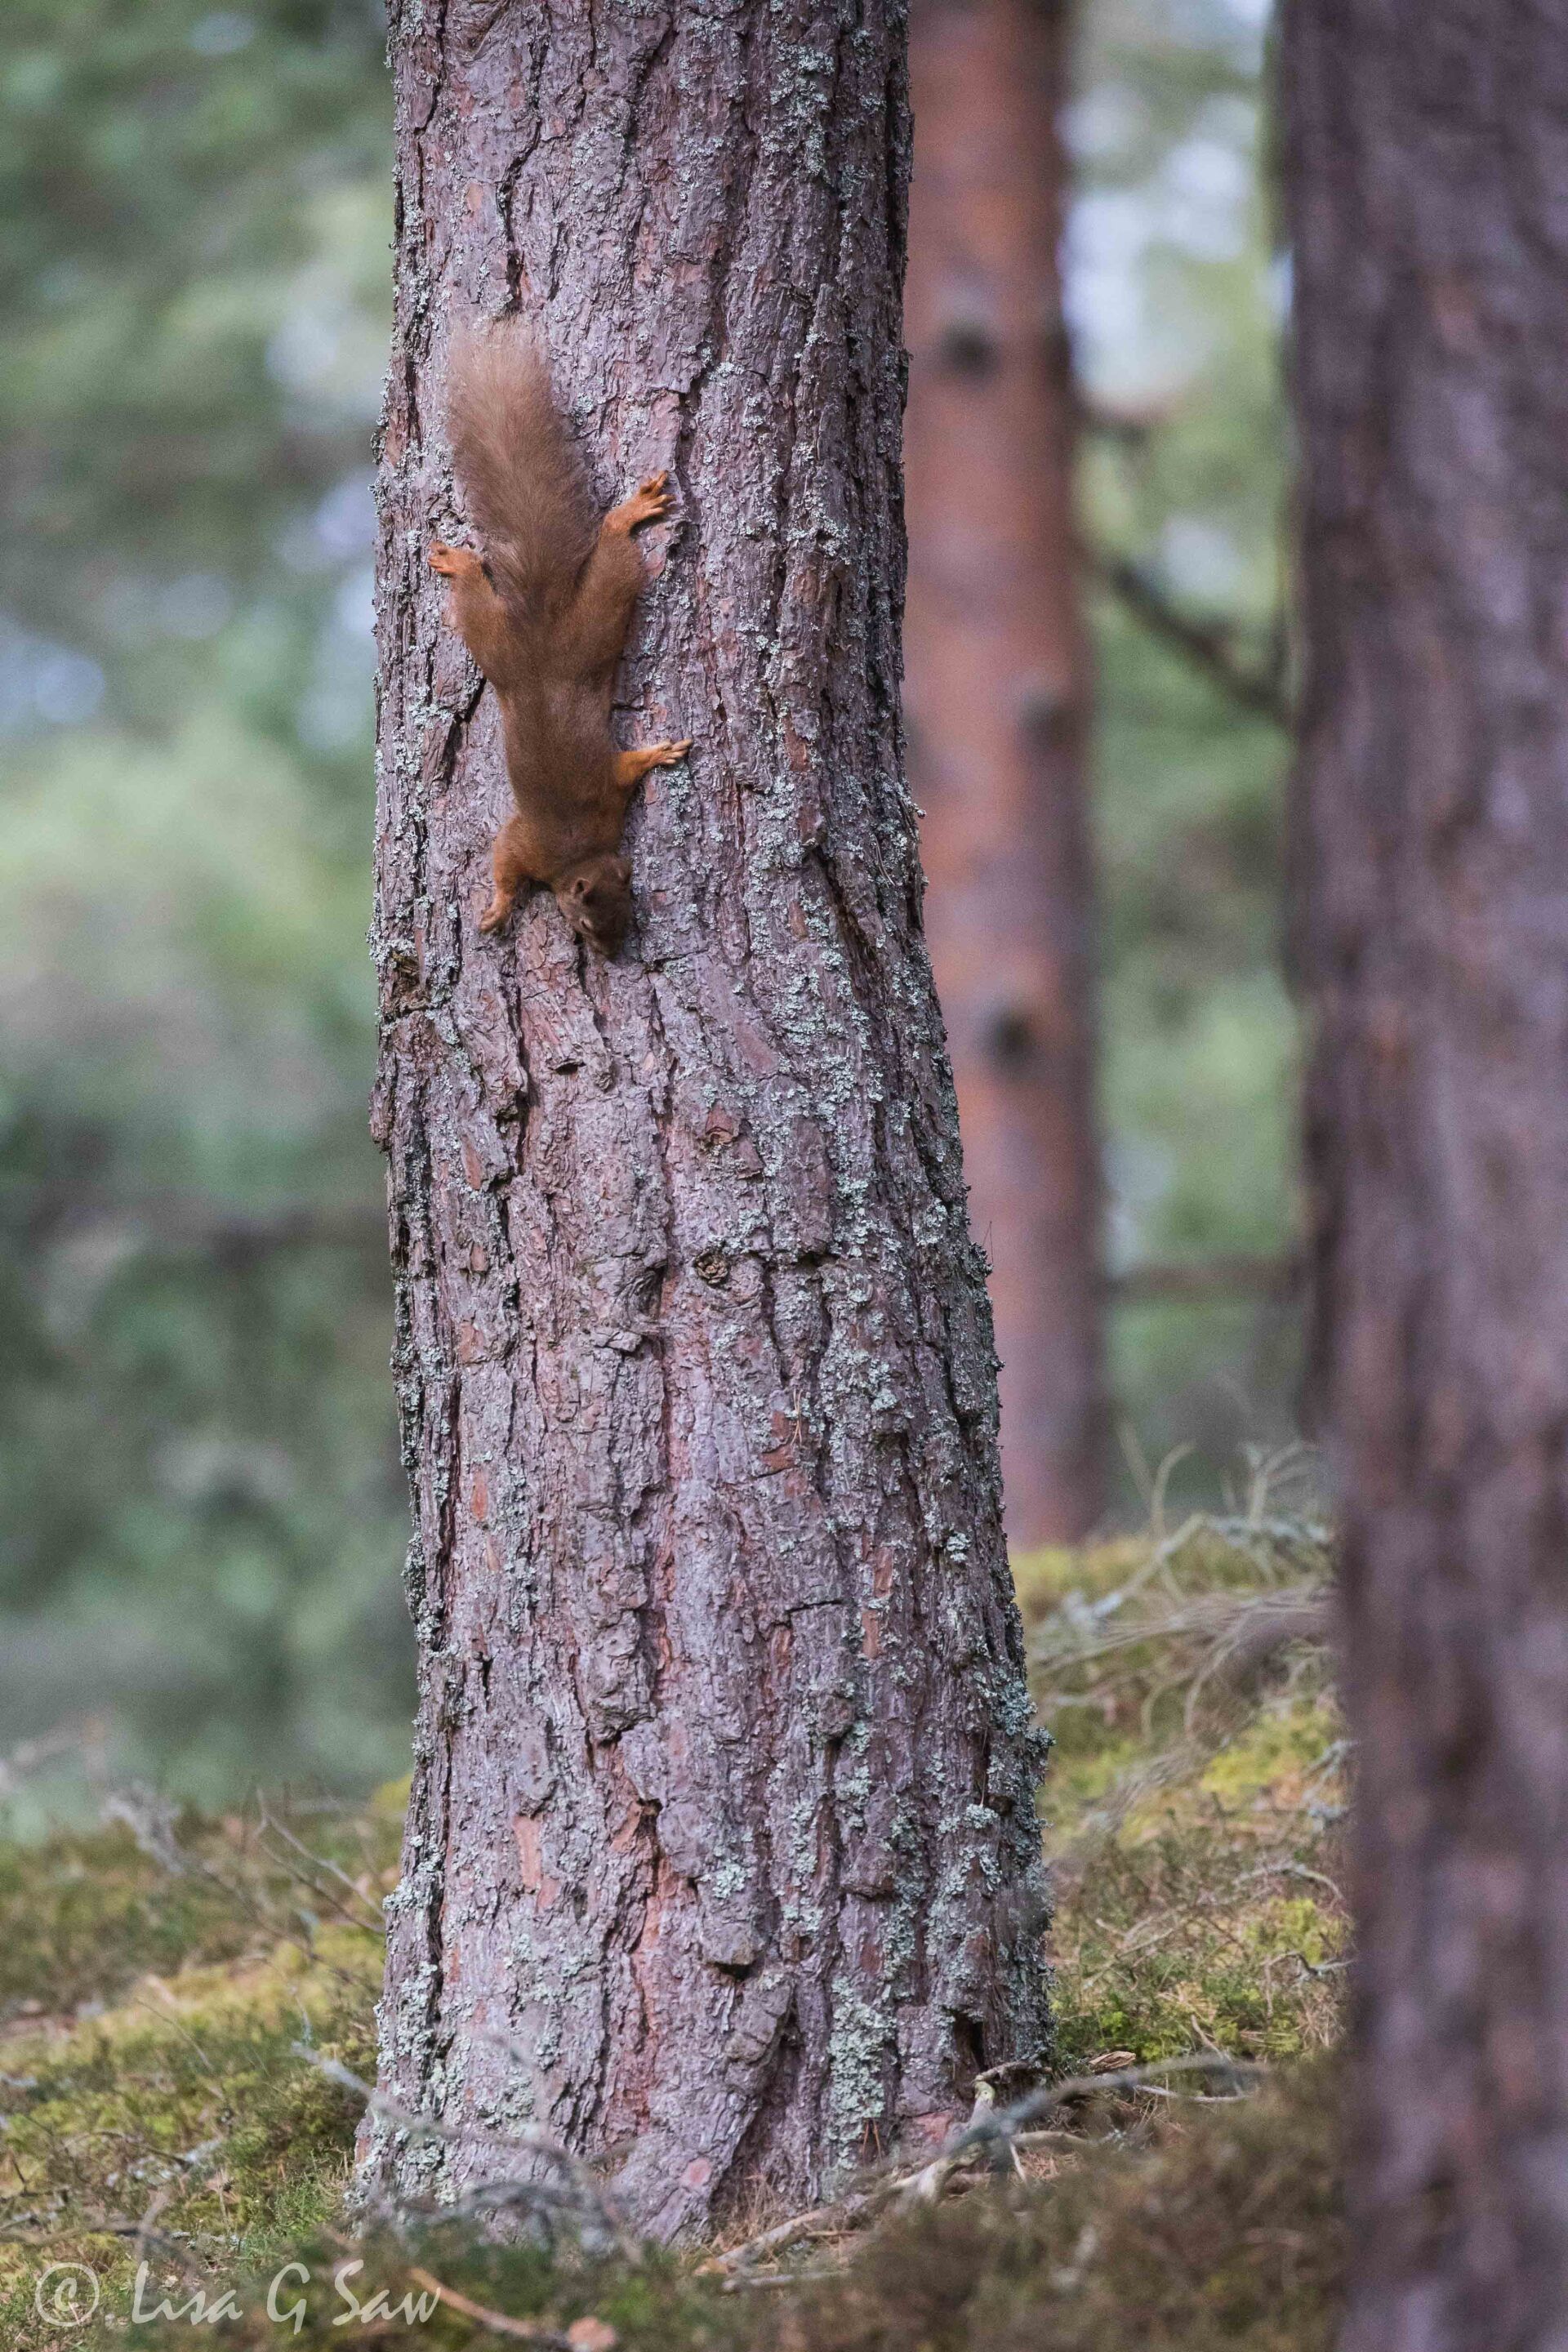 Red Squirrel climbing down a pine tree